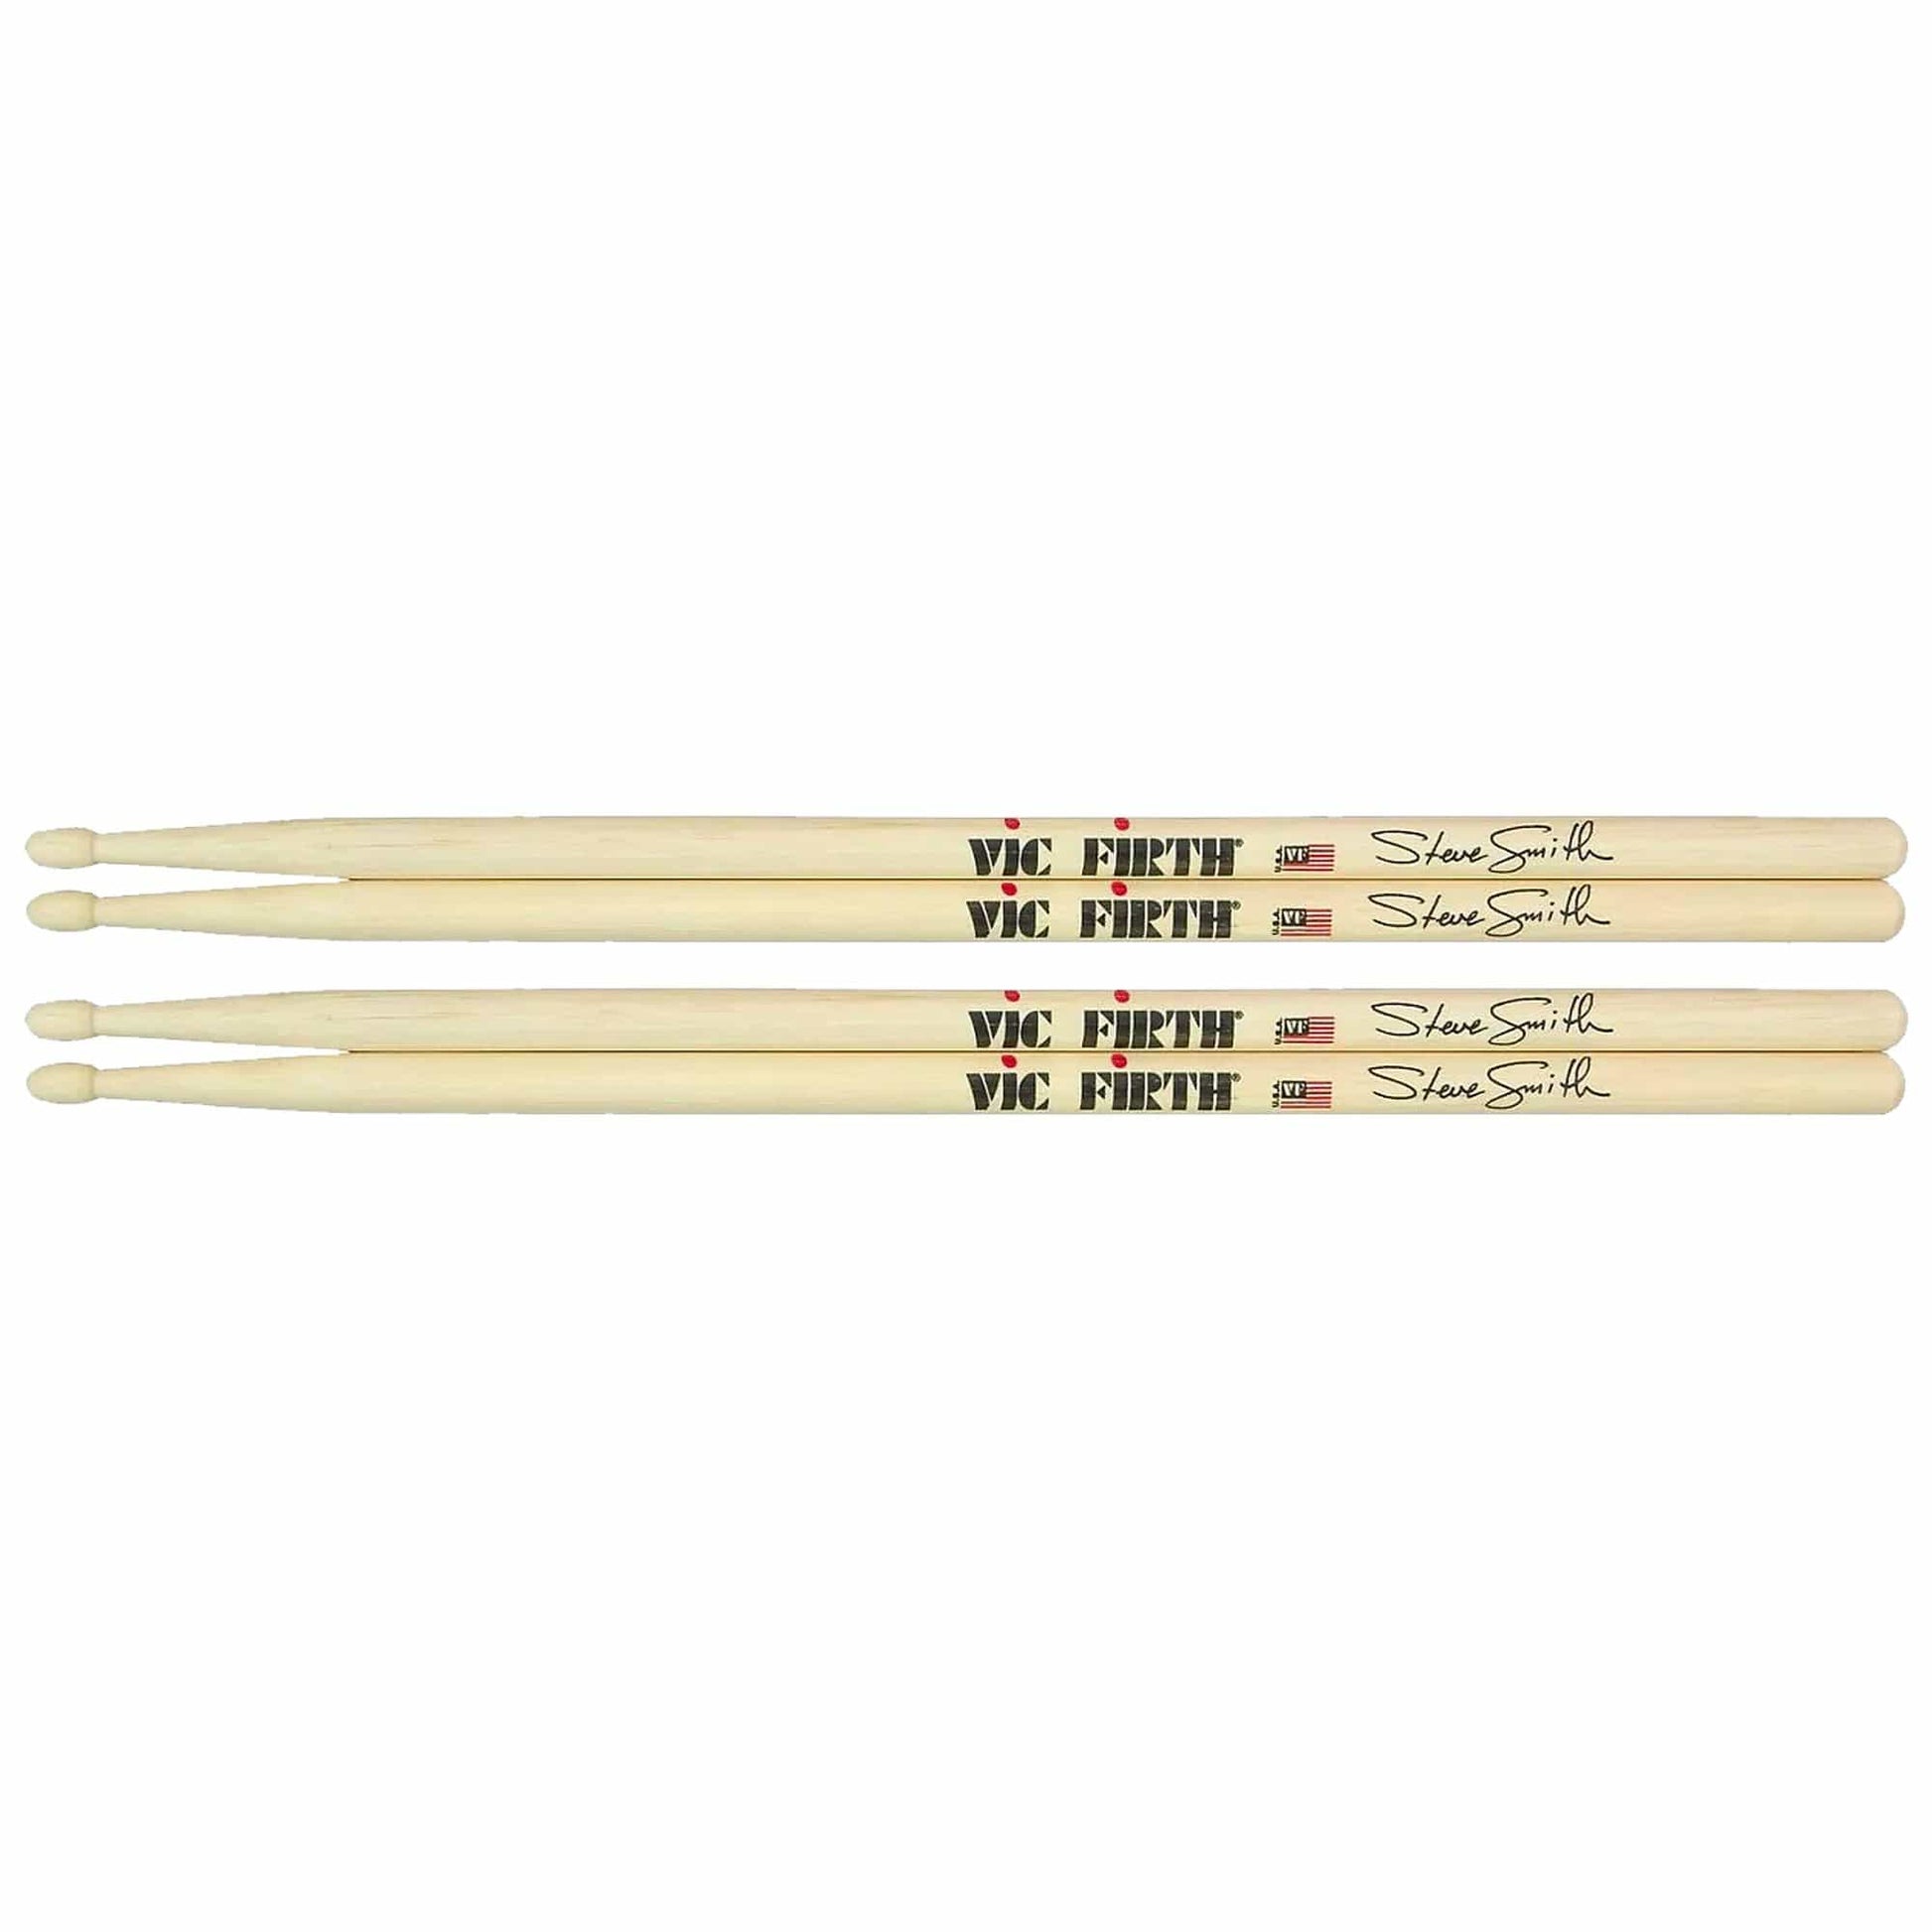 Vic Firth Steve Smith Signature Drum Sticks (2 Pair Bundle) Drums and Percussion / Parts and Accessories / Drum Sticks and Mallets